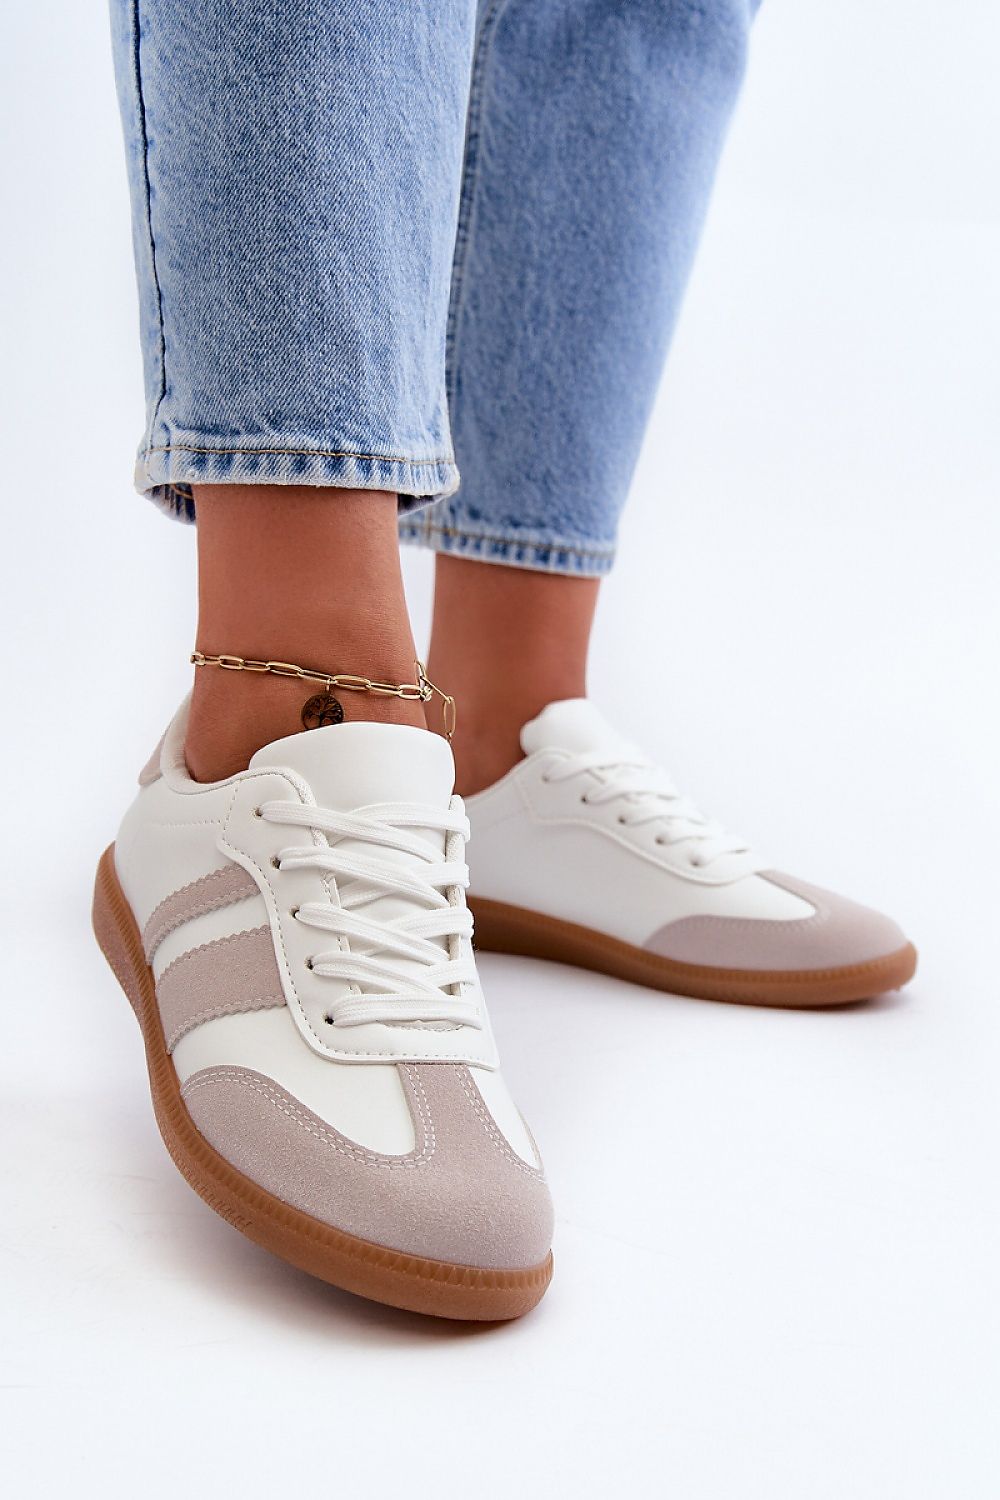 Sport Shoes model 198514 Step in style